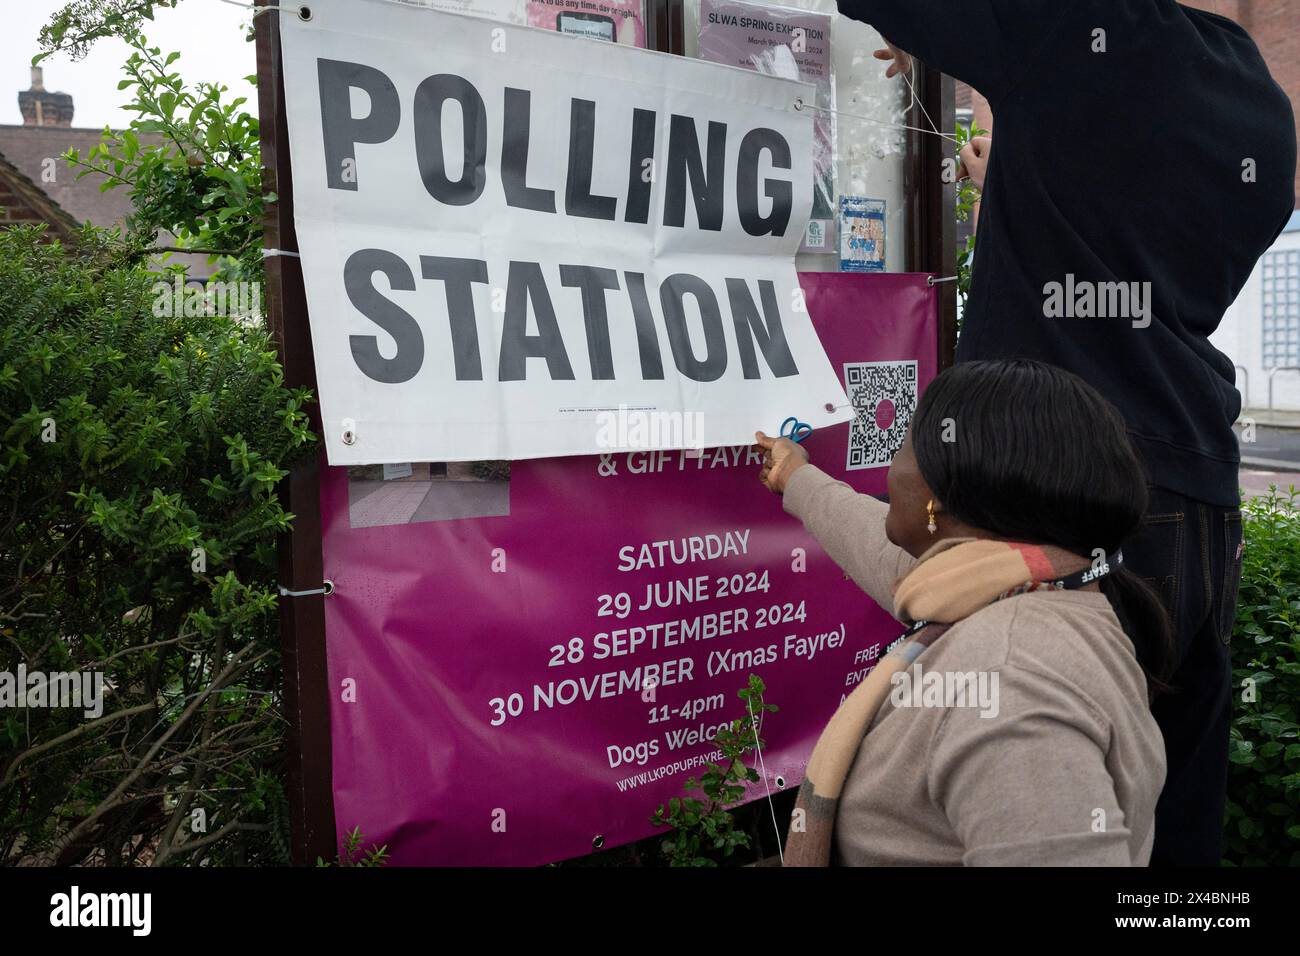 Polling station staff attach posters outside St Barnabas Parish Hall in Dulwich Village, on the day that Londoners vote for their mayor and London Assembly members, on 2nd May 2024, in London, England. Stock Photo